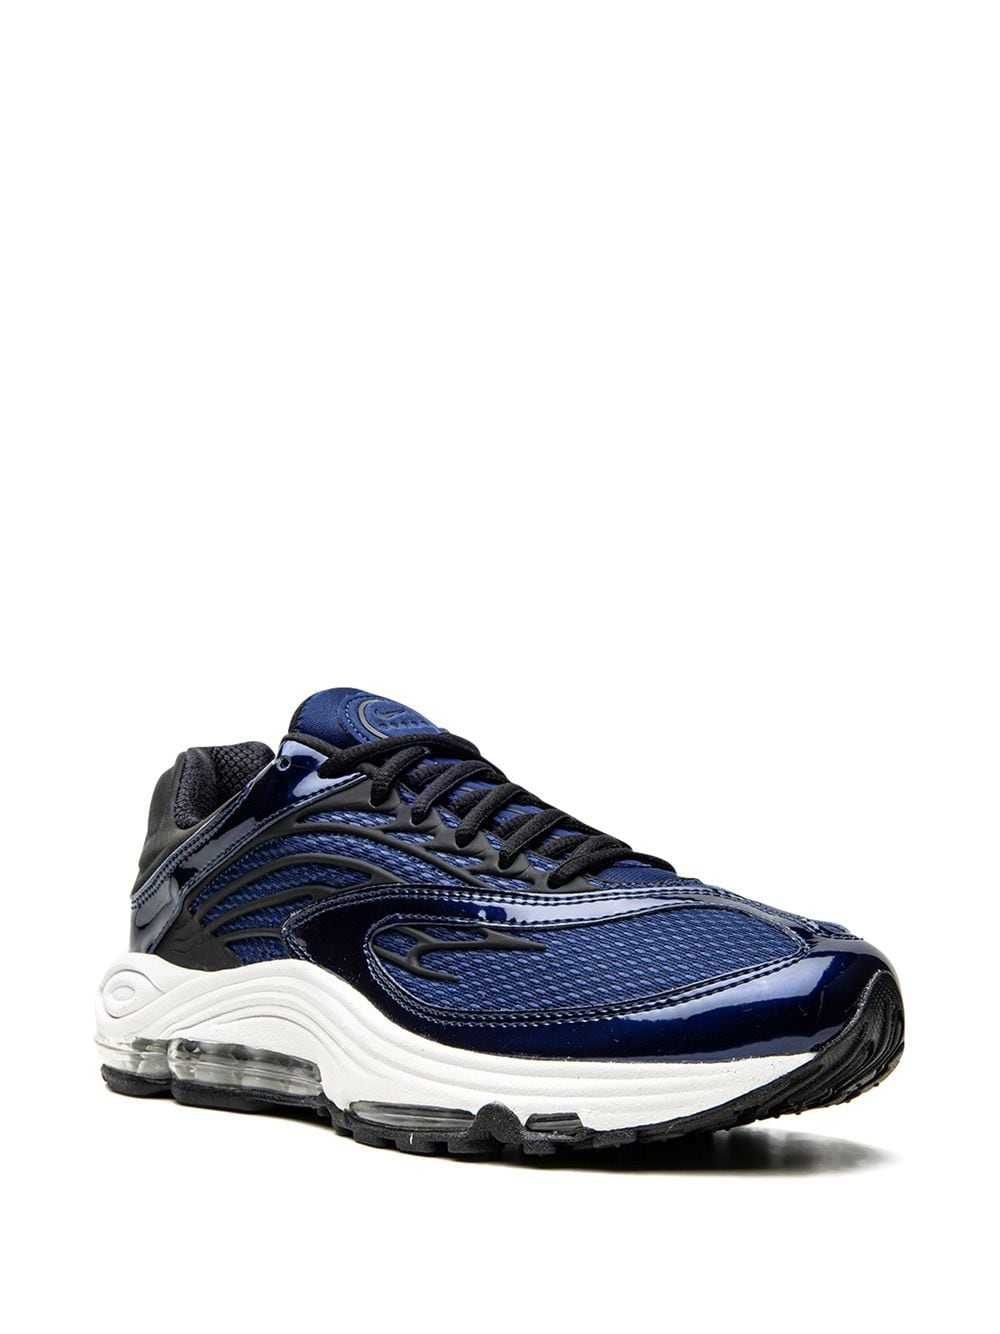 Shop Nike Air Tuned Max "blue Void" Sneakers